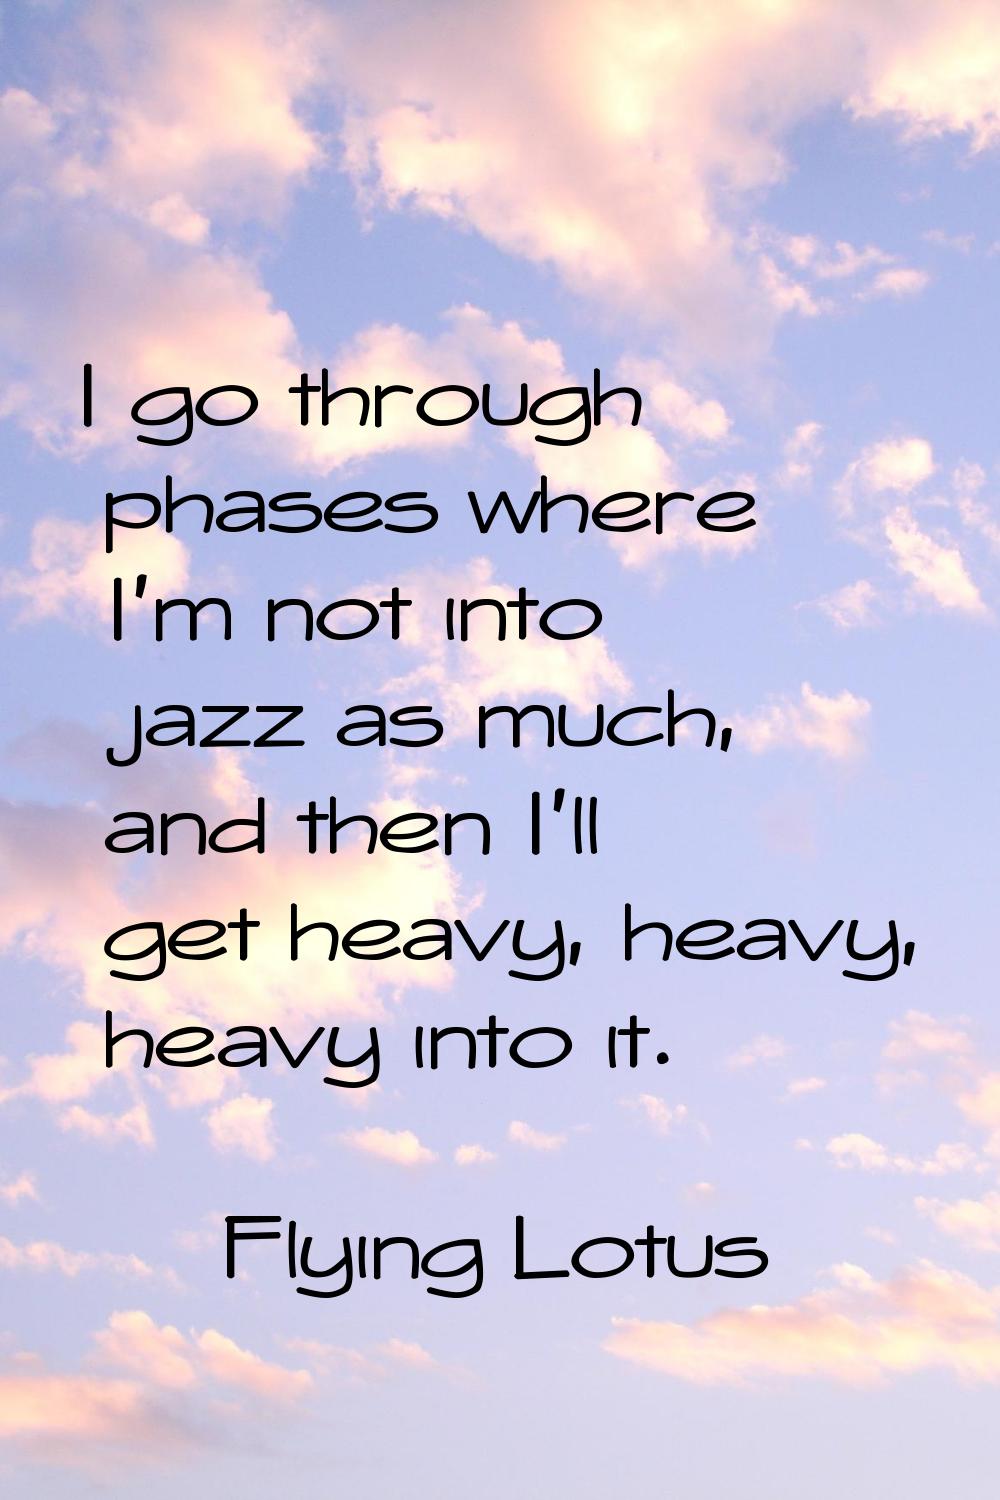 I go through phases where I'm not into jazz as much, and then I'll get heavy, heavy, heavy into it.